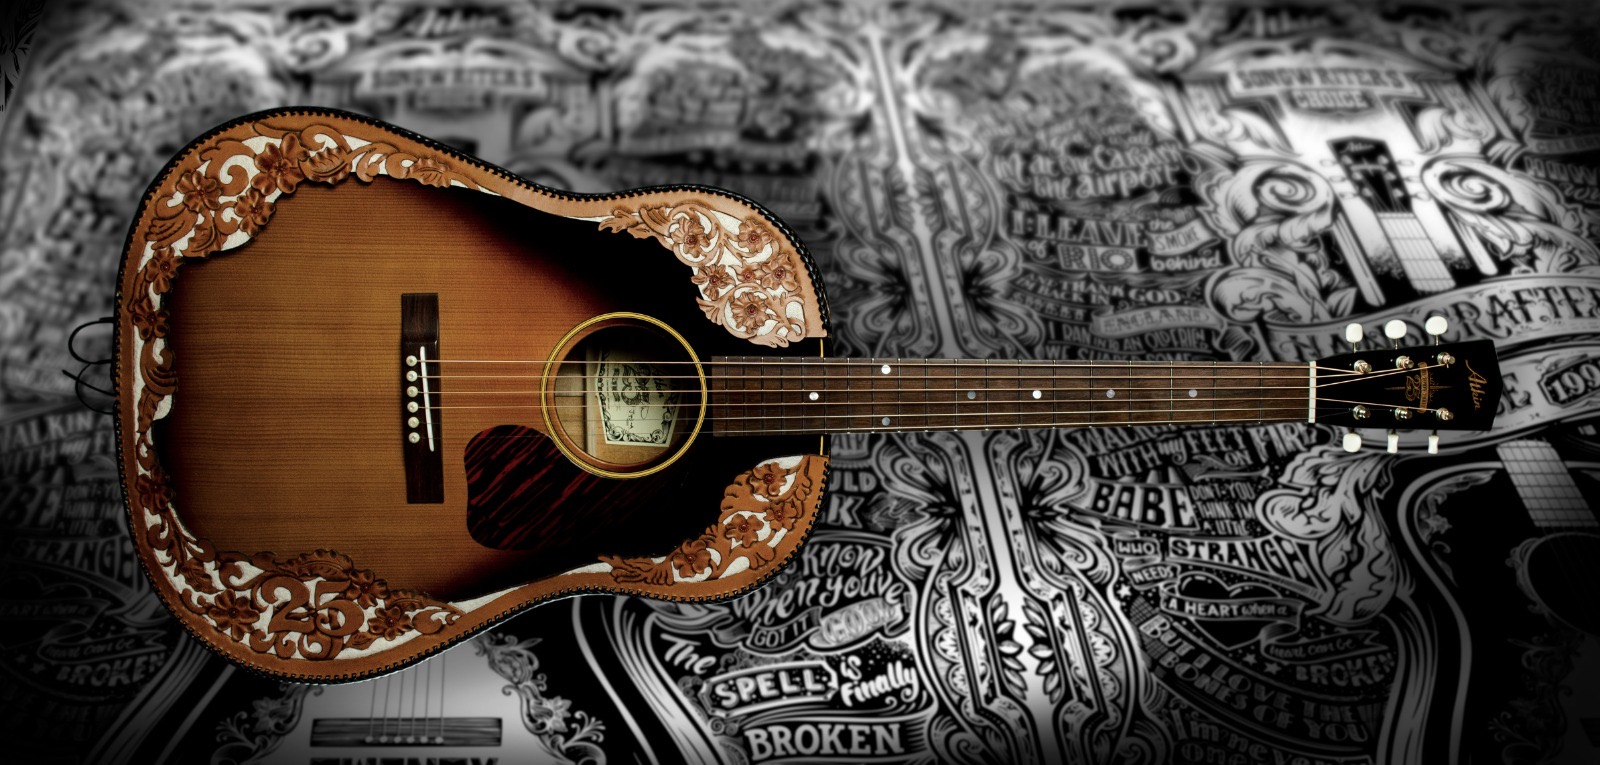 Atkin Guitars - Hand Crafted in the UK